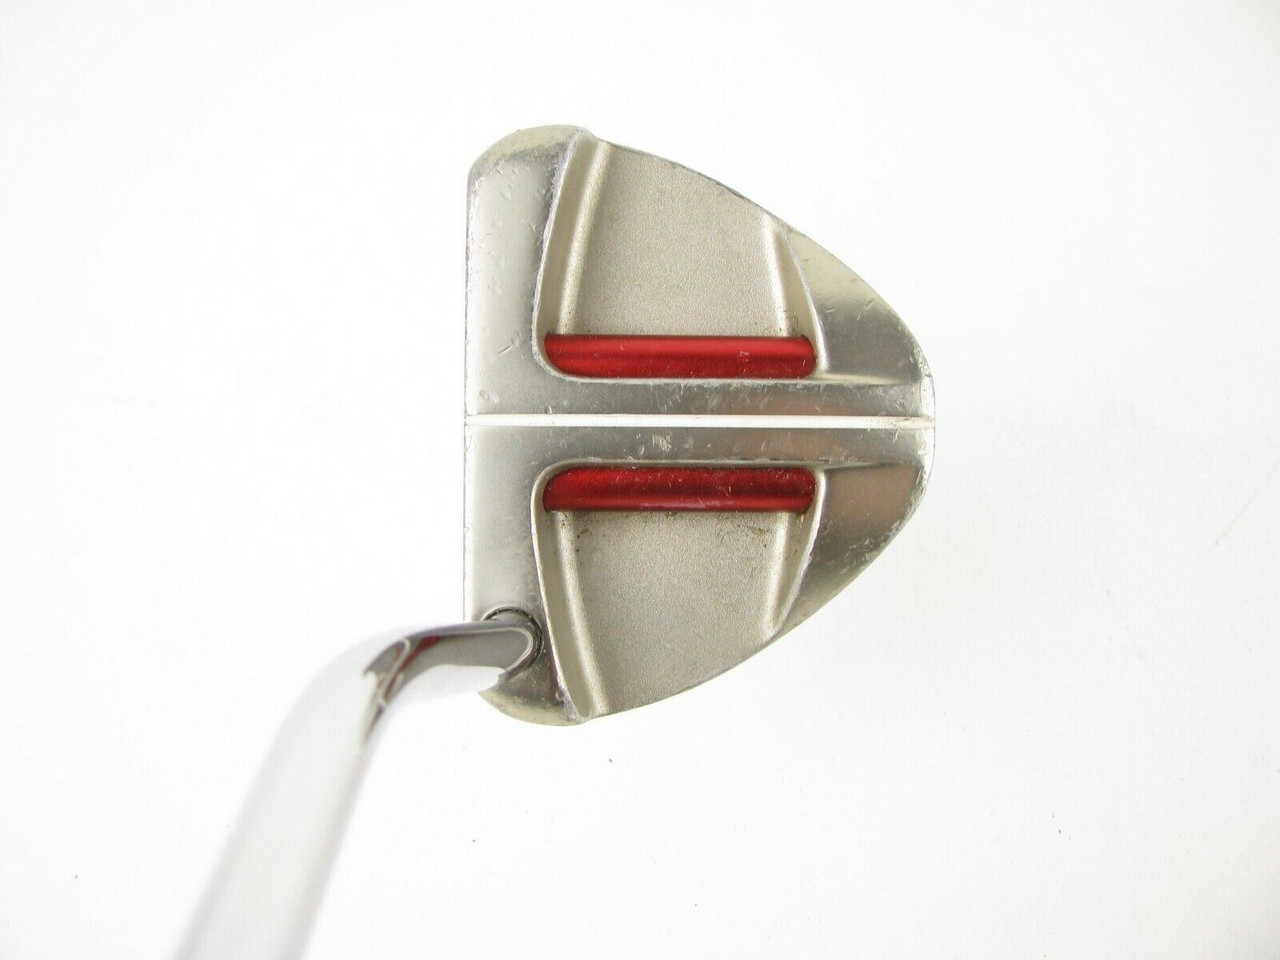 TaylorMade Rossa Mezza Monza Putter 32 inches